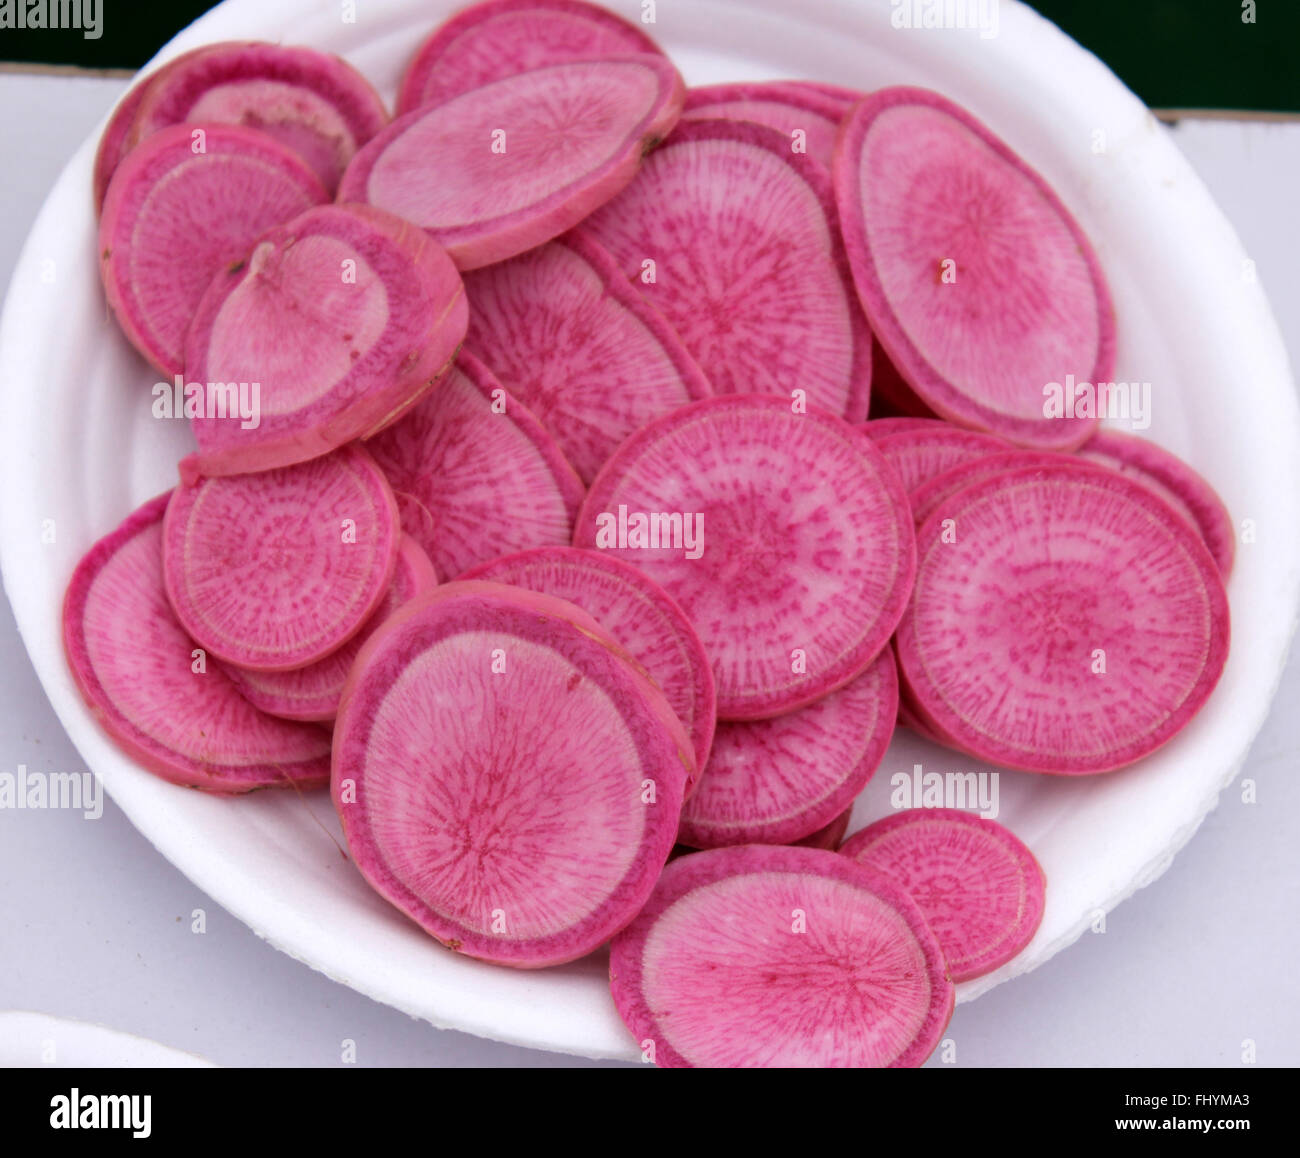 Raphanus sativus, PUSA Gulabi radish, sliced, cultivar with long rose coloured roots, commonly used in salads, vegetable crop Stock Photo